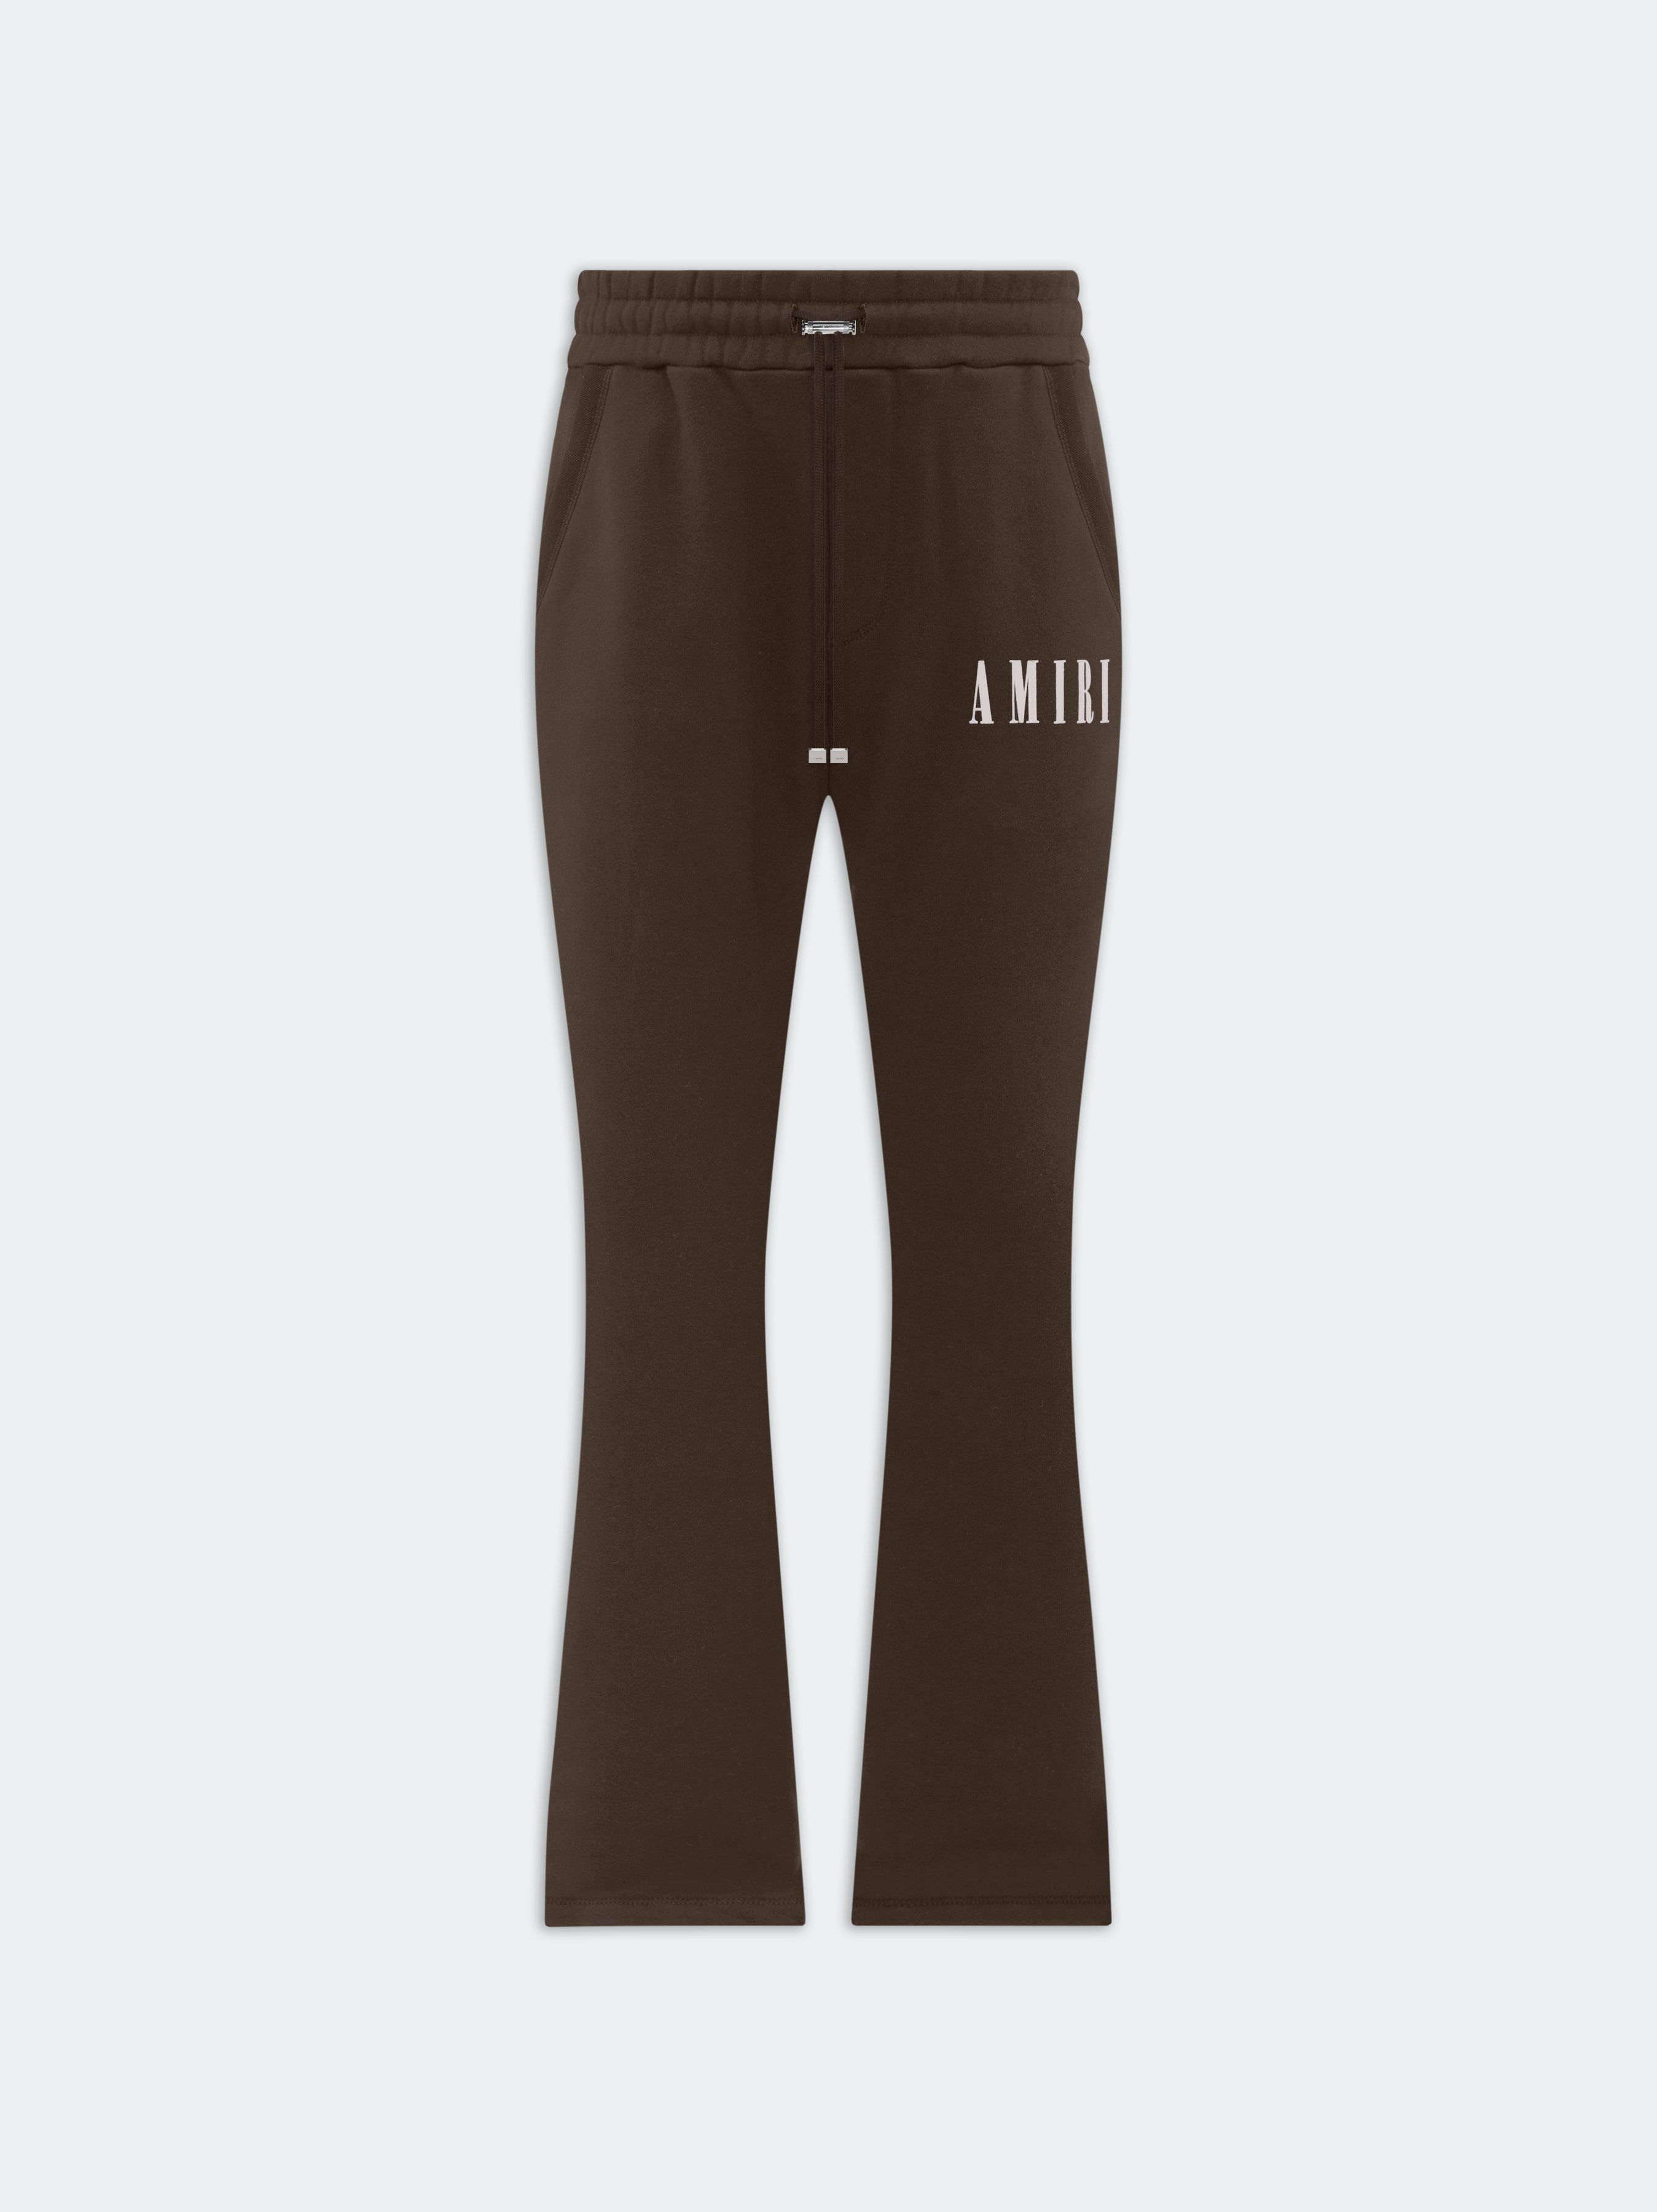 Product WOMEN - CORE LOGO FLARE SWEATPANT - Brown featured image